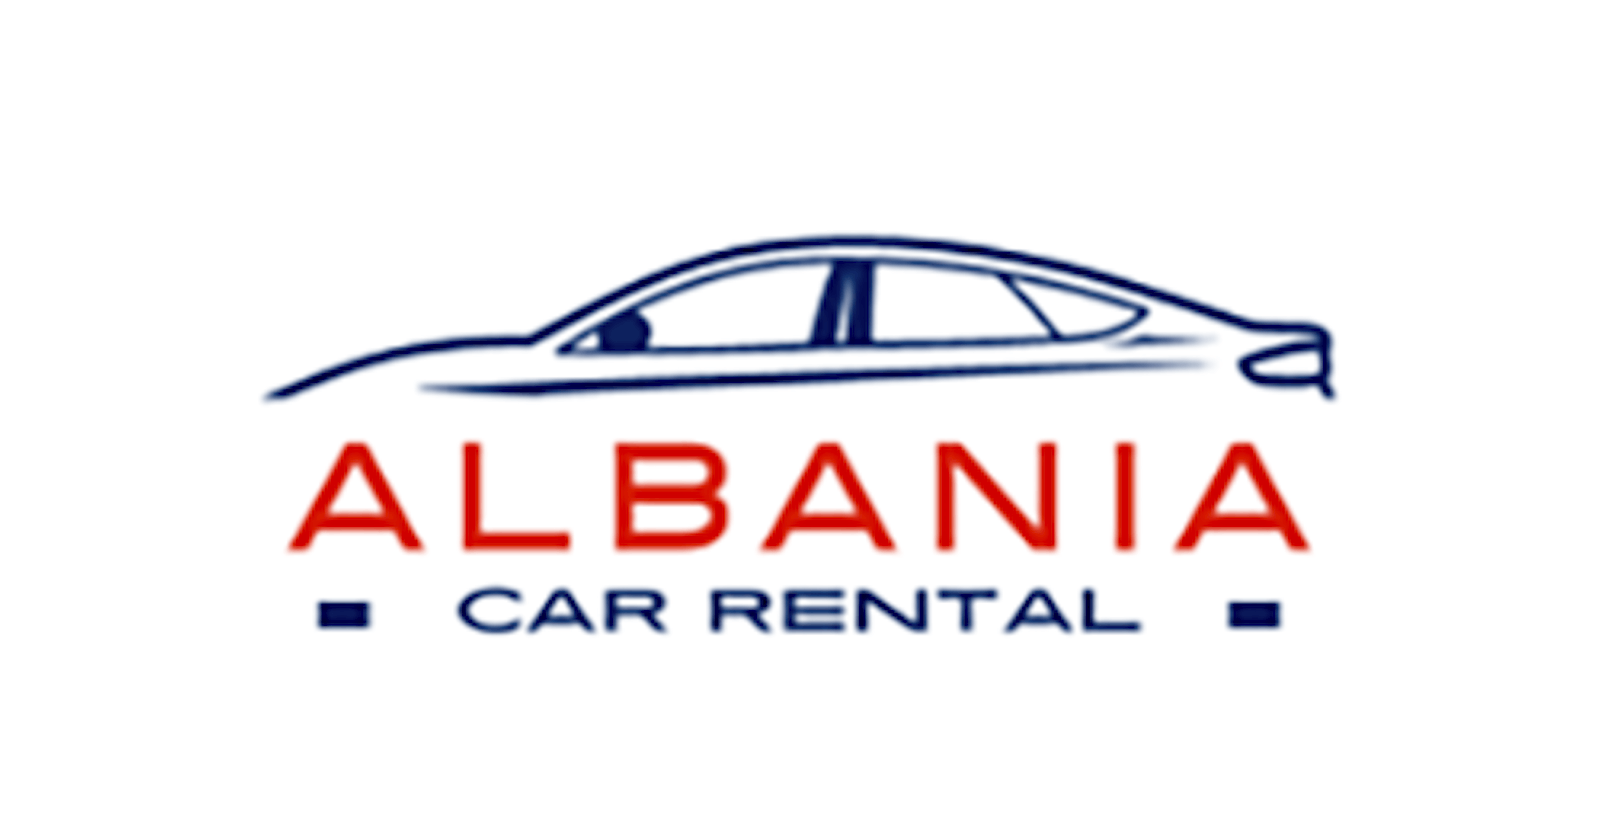 Why Opt for Car Rental Services in Albania?